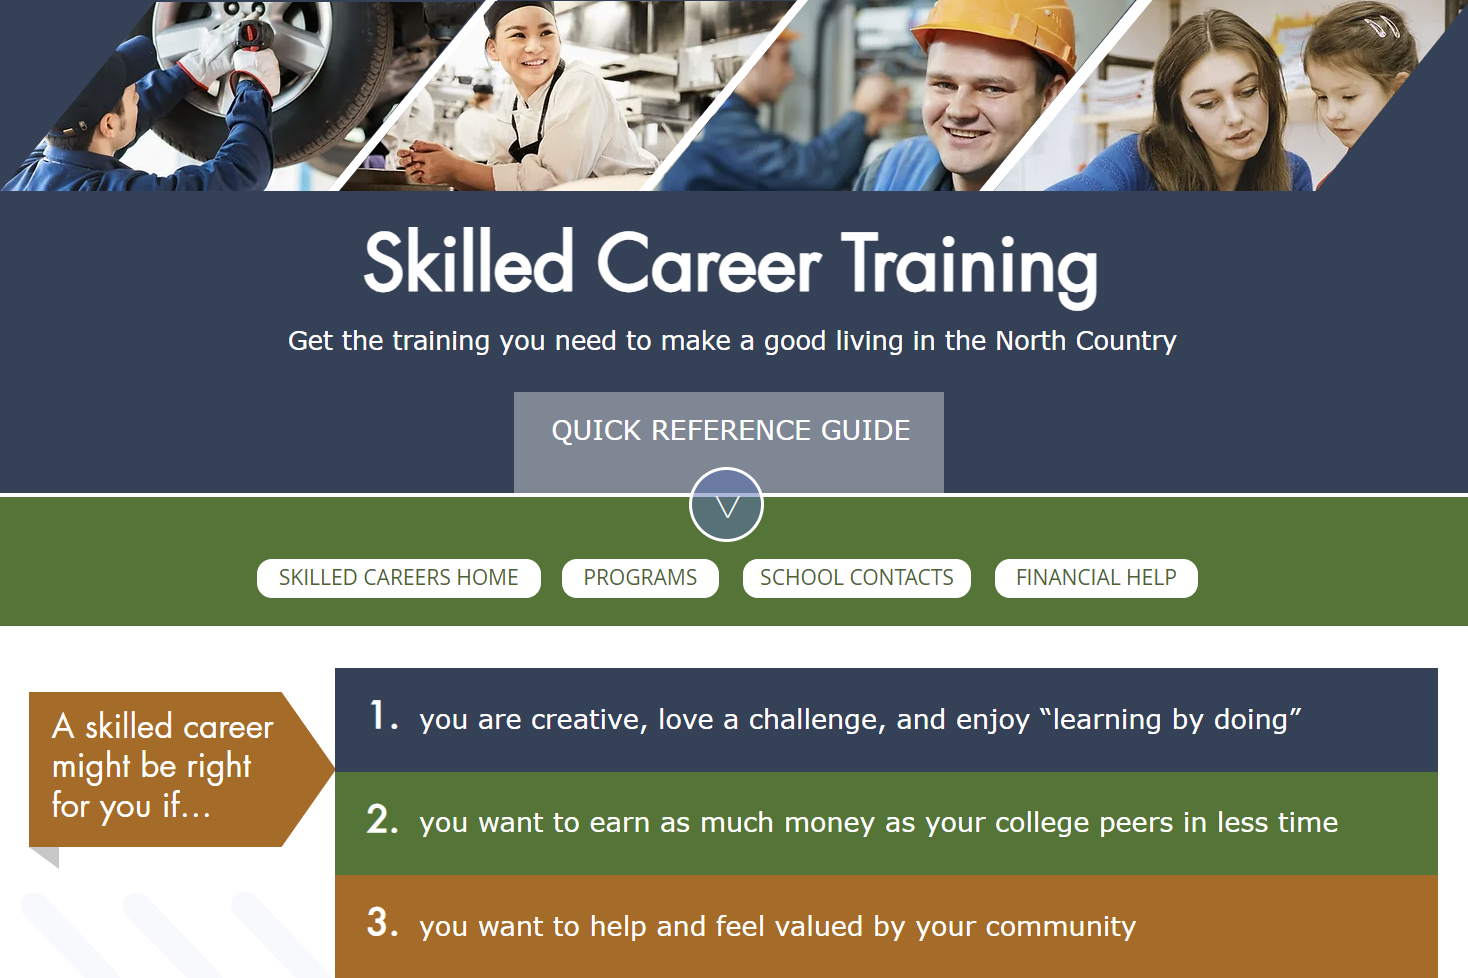 Skilled Career Training resource guide